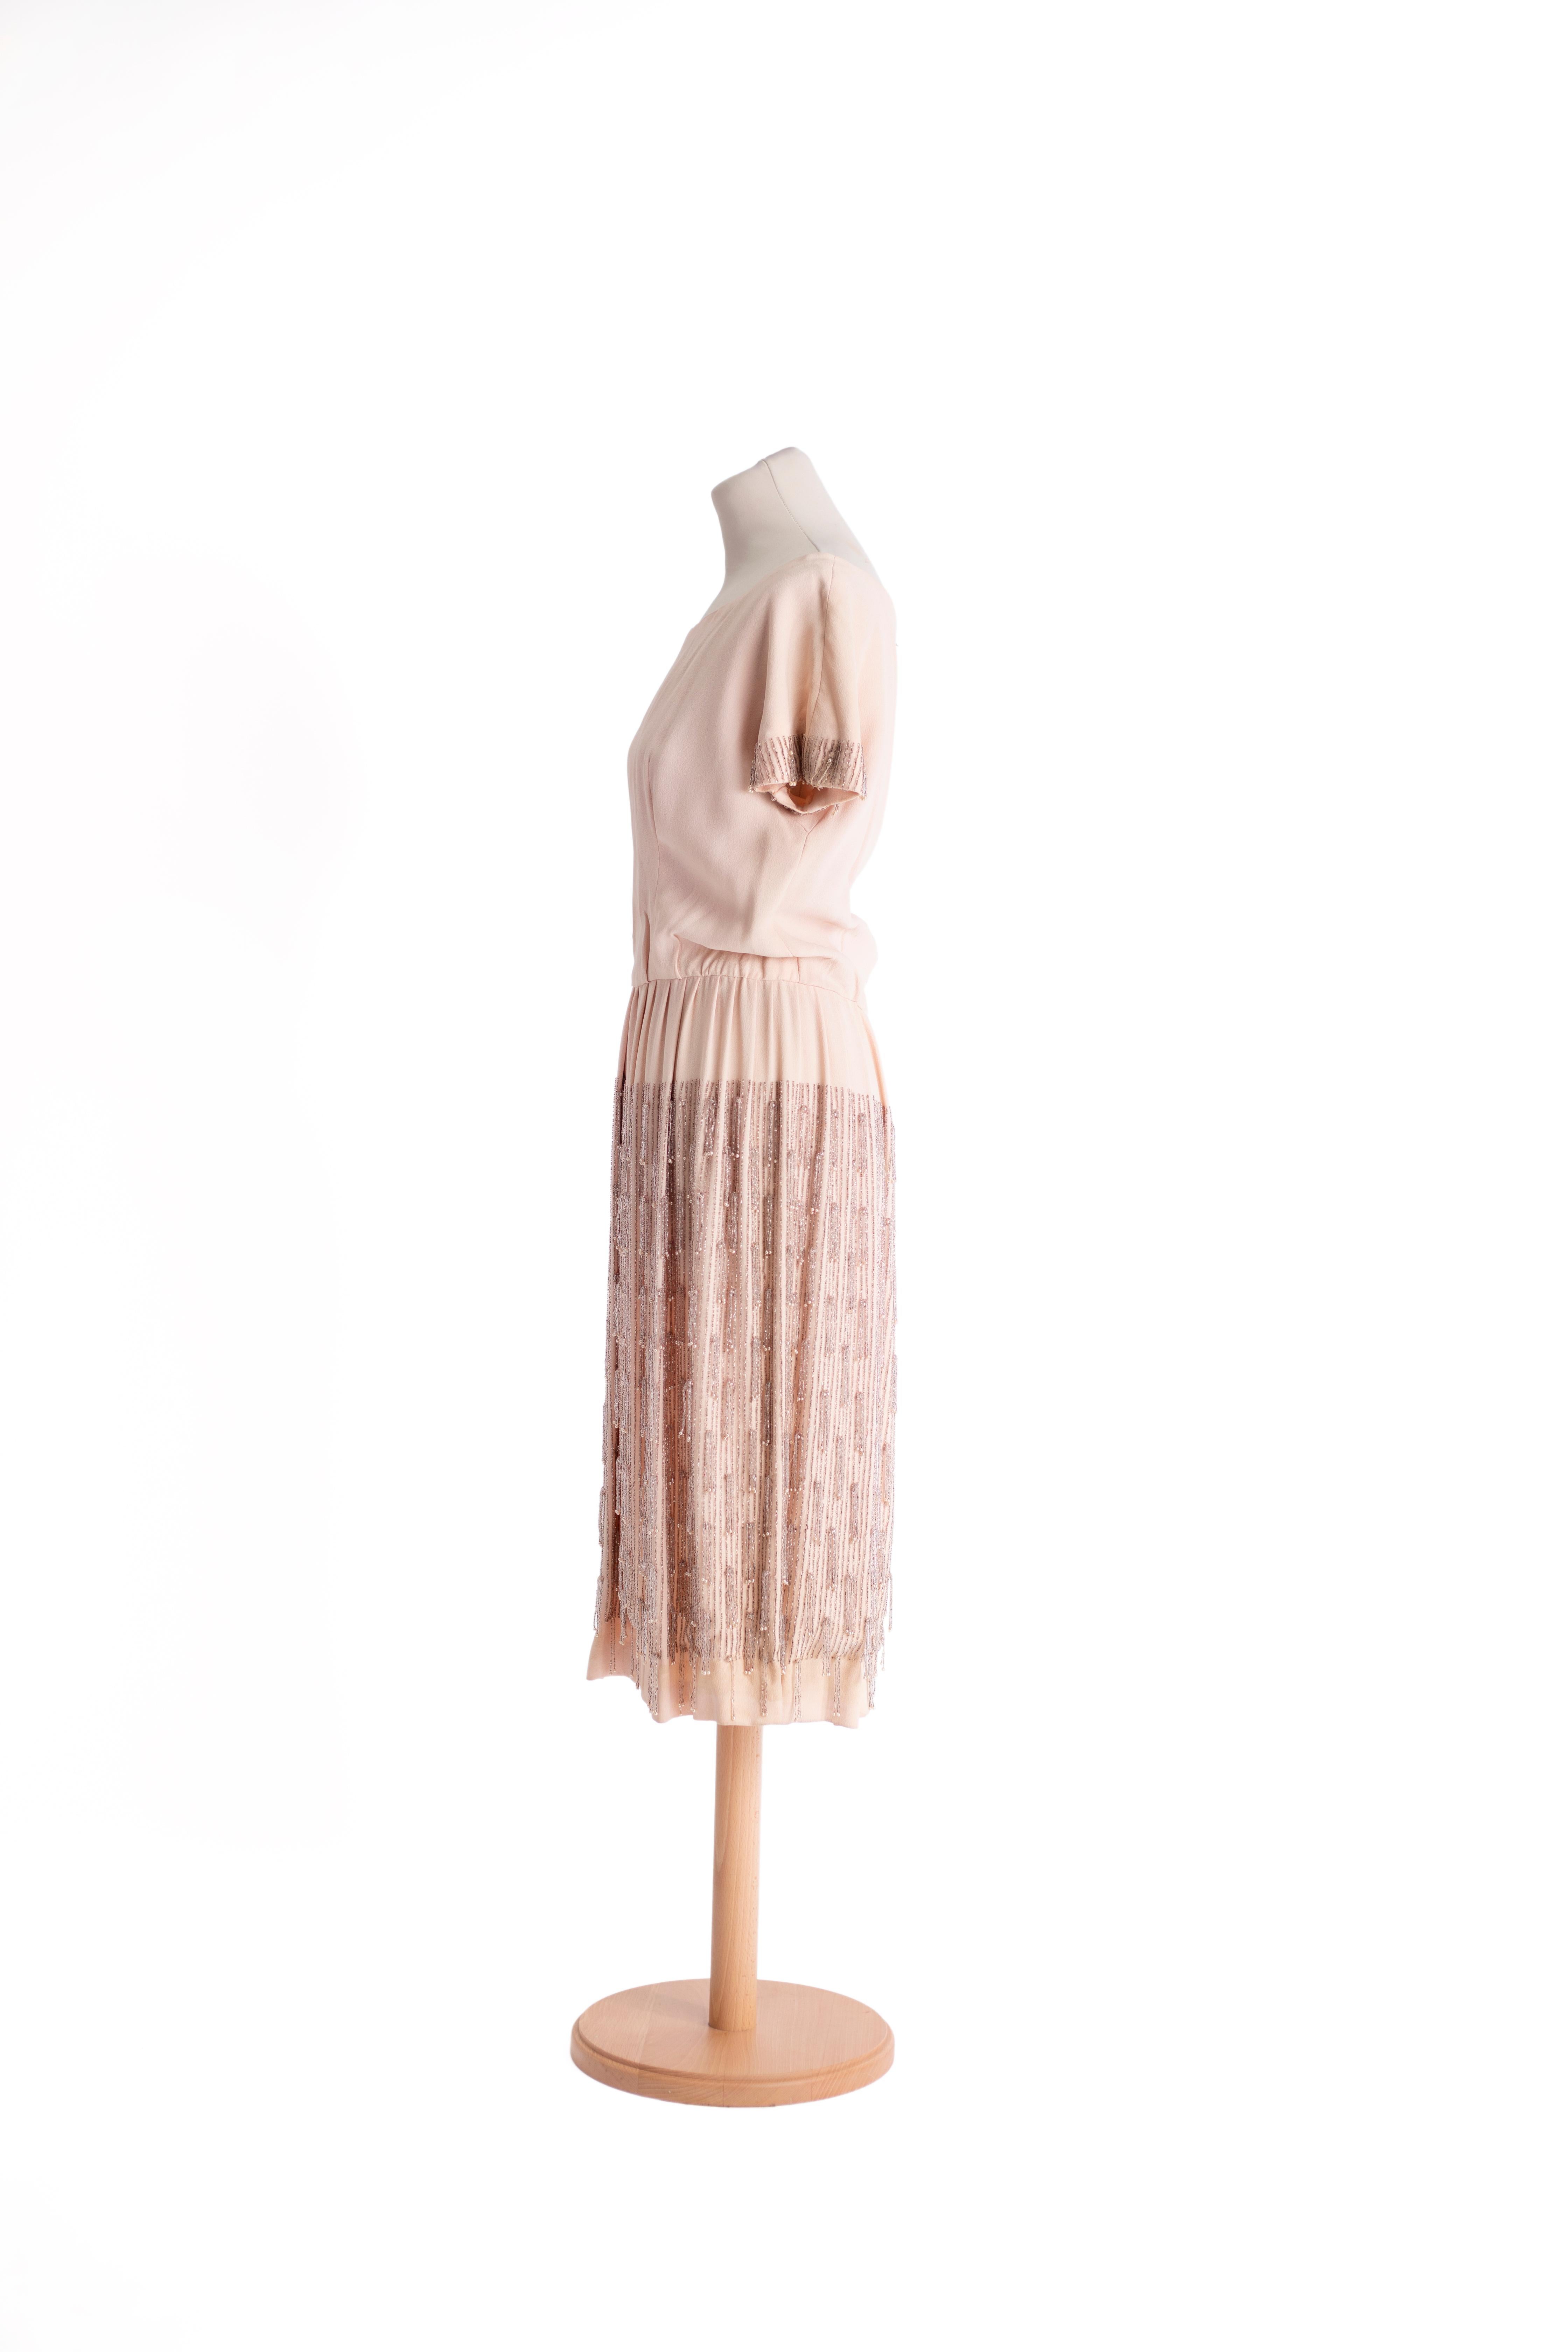 1960s Bernard Sagardoy  Vintage dress, in light pink silk, with boat neckline and beaded insert on the short sleeves and the skirt.

SIZE IT: 42
SIZE USA: 10

Measures:
Waist: 72 cm
Length: 107 cm
Bust: 88 cm
